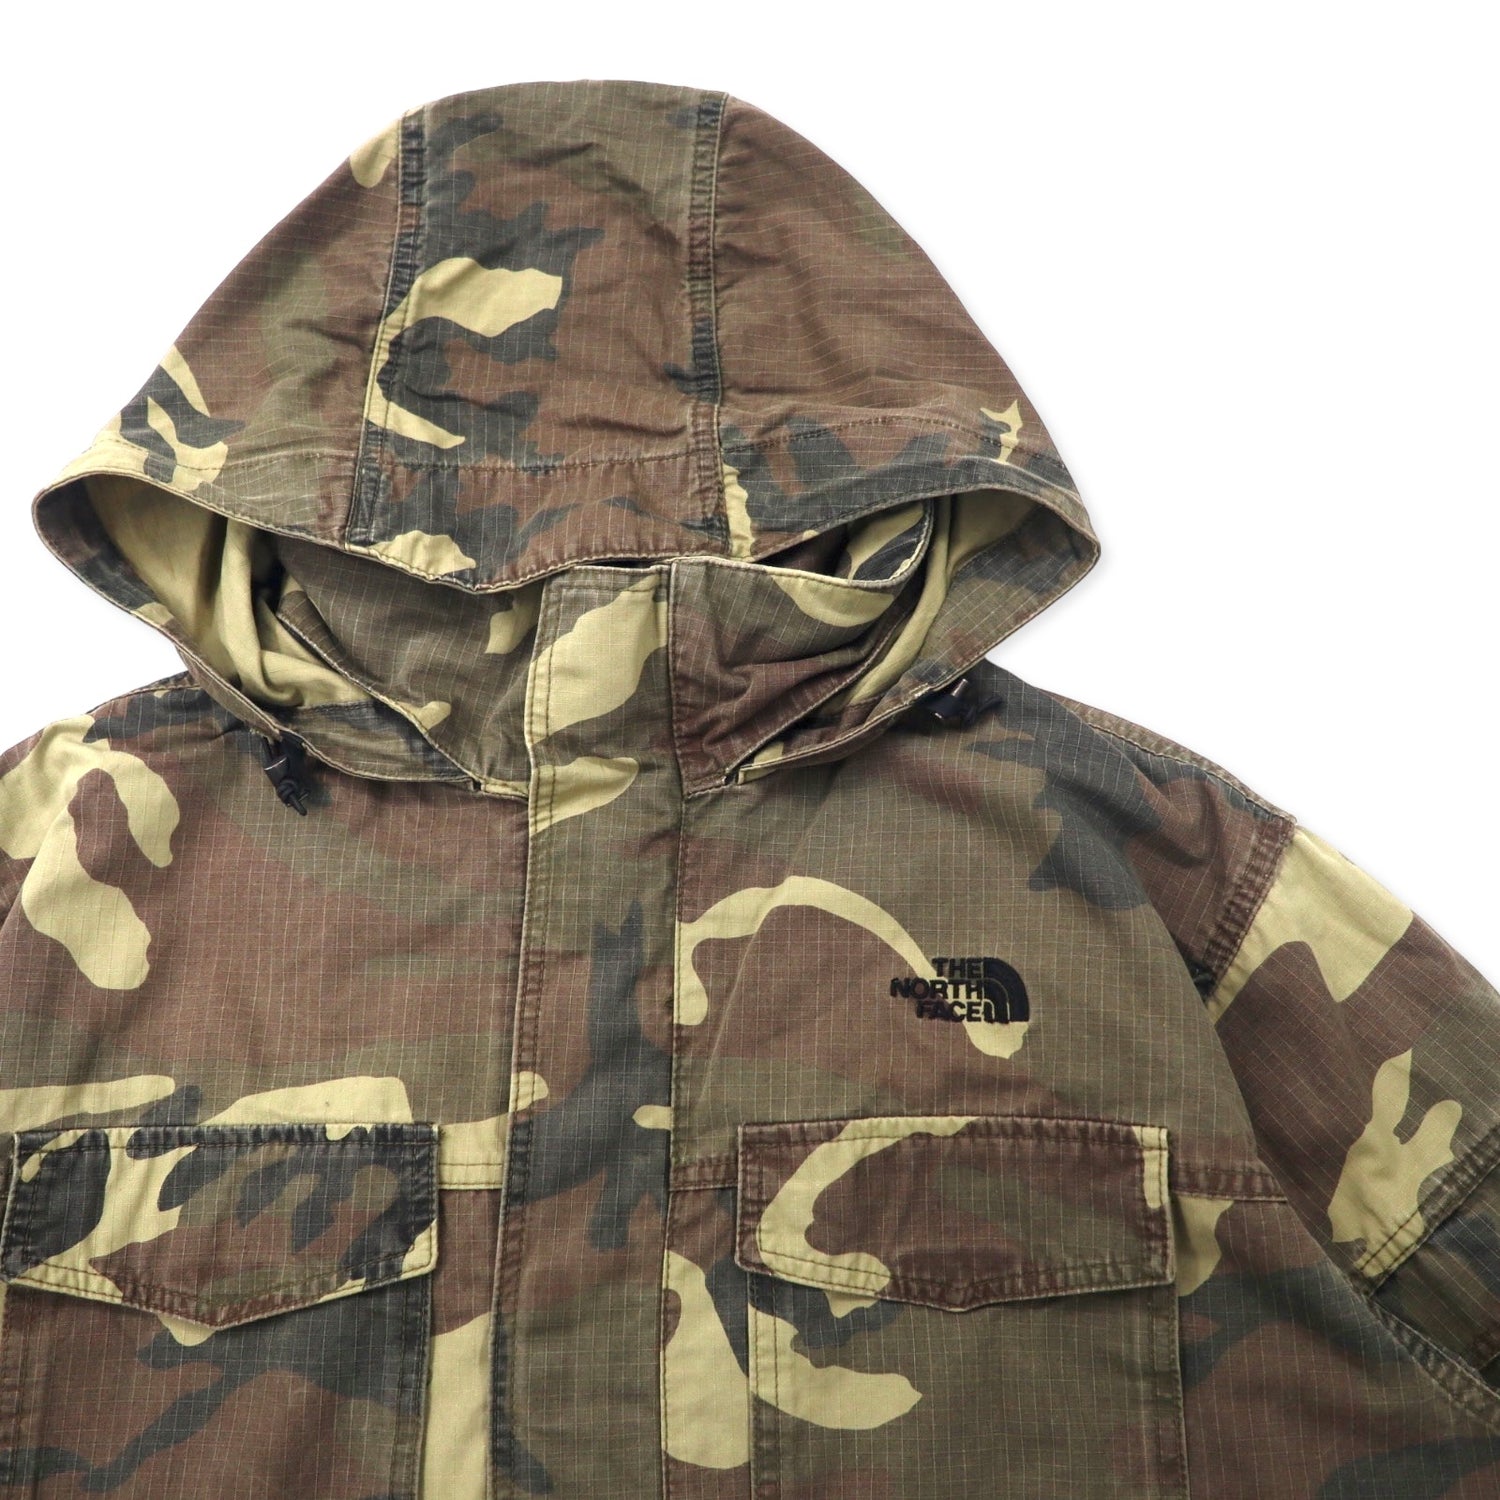 THE NORTH FACE Bee Mex HOODIE Military Jacket XL KHAKI CAMOUFLAGE 